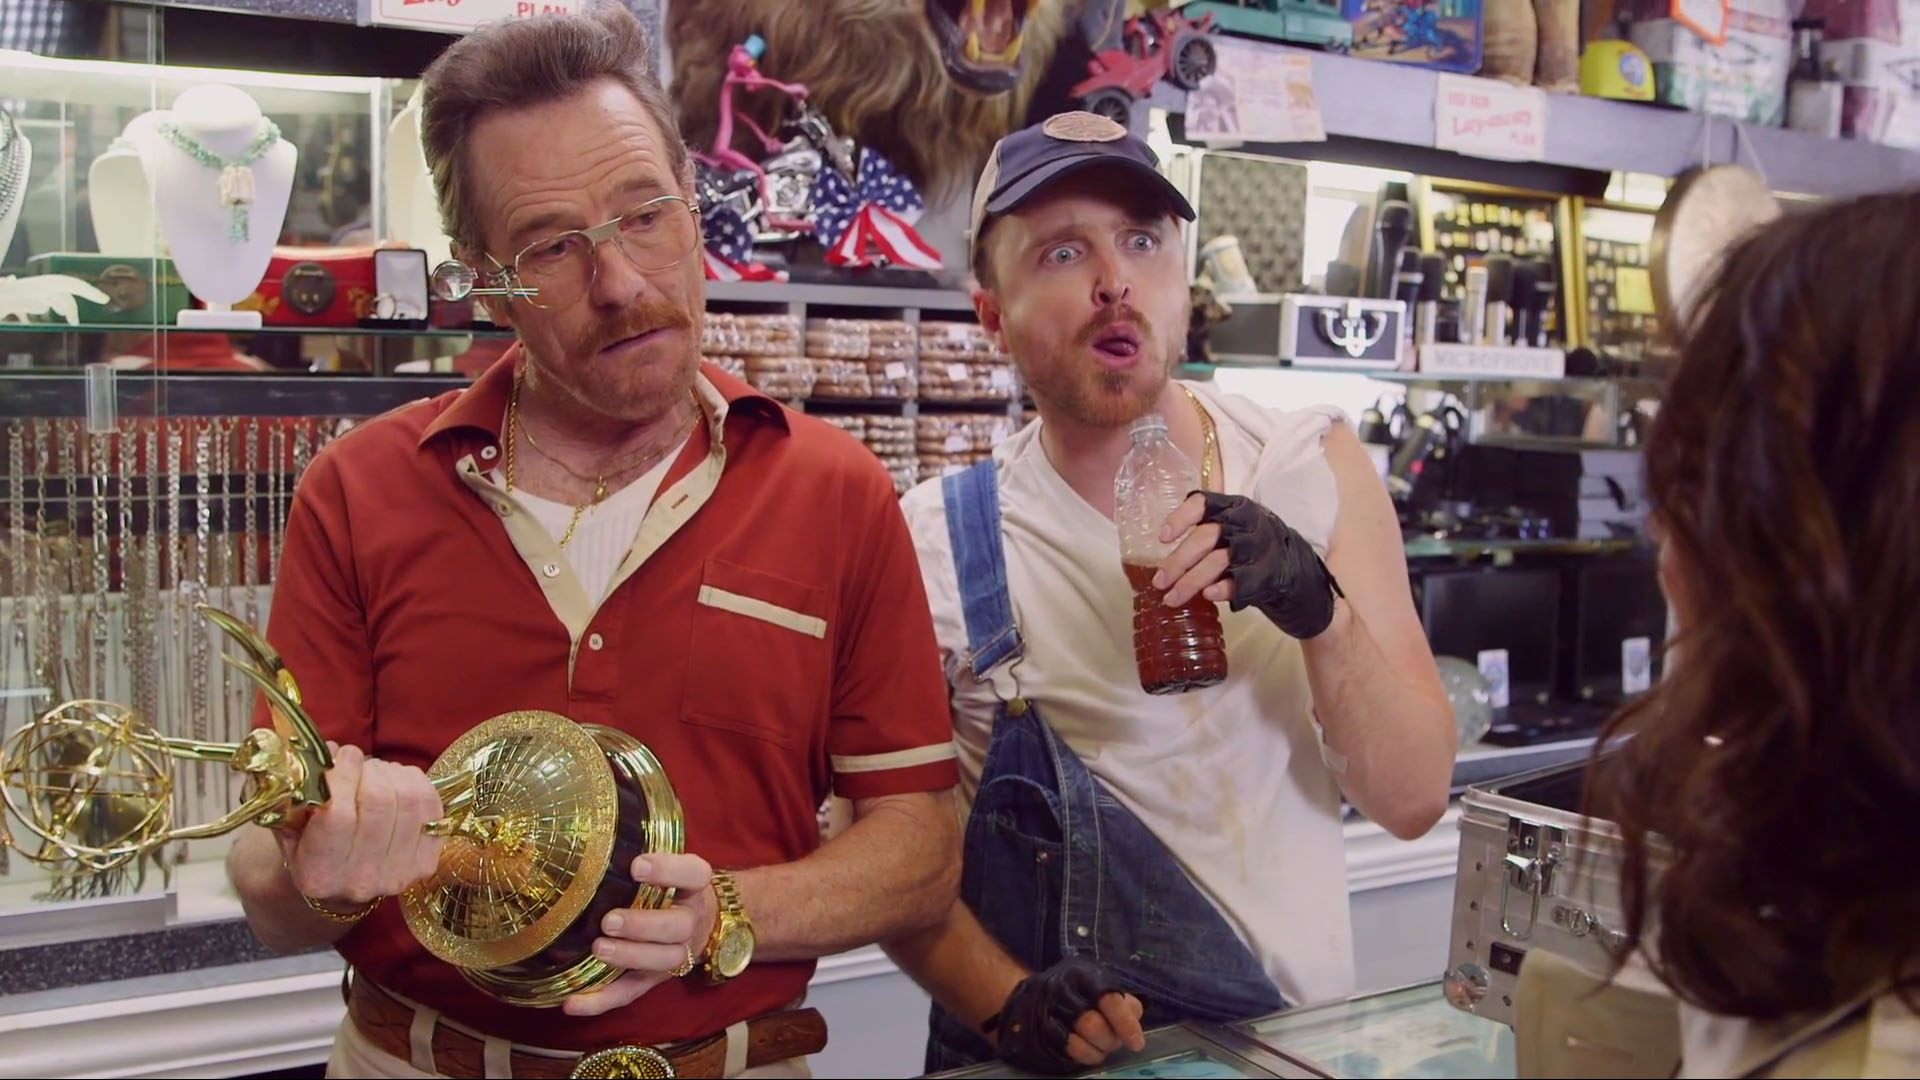 Barely Legal Pawn, feat. Bryan Cranston, Aaron Paul and Julia Louis-Dreyfus